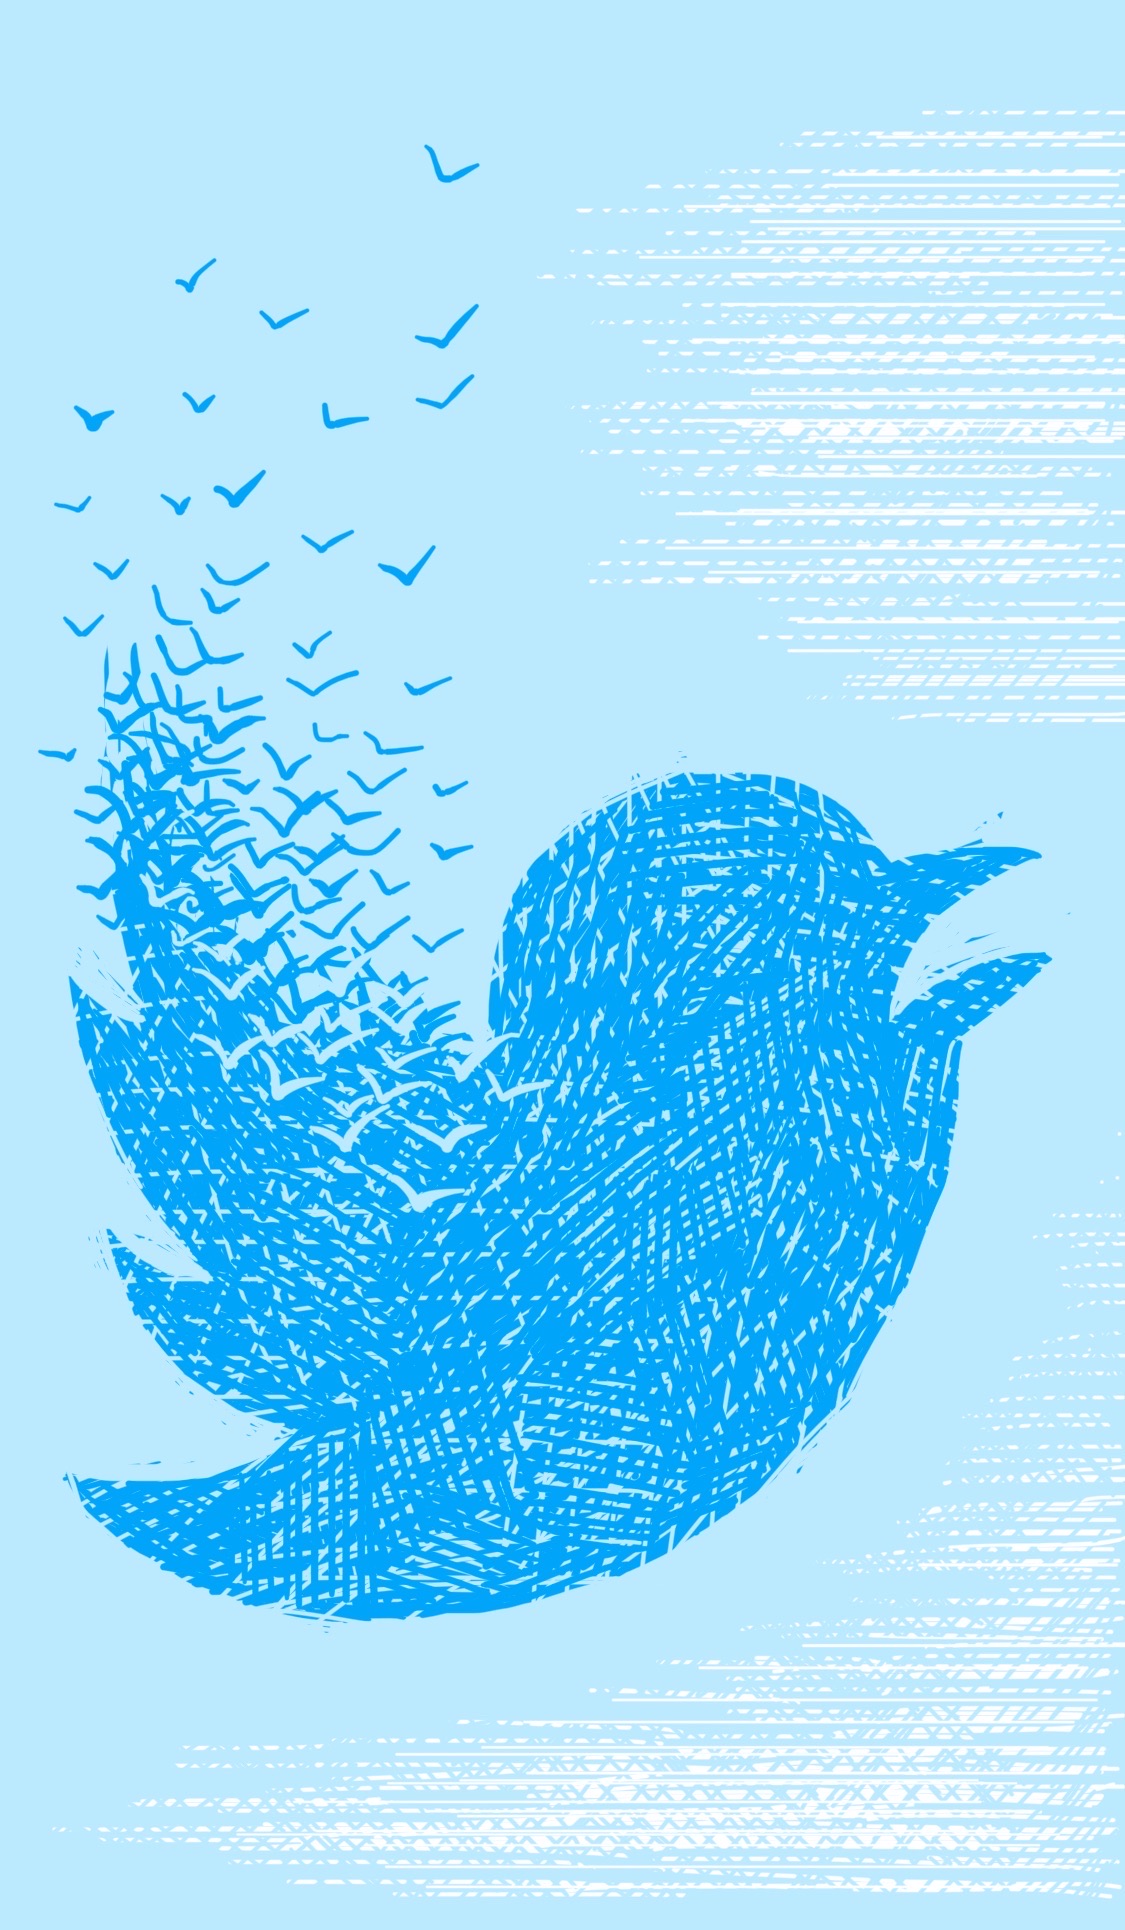 The Twitter logo, disintegrating into a flock of small birds fleeing the absolute circus that hellsite has become